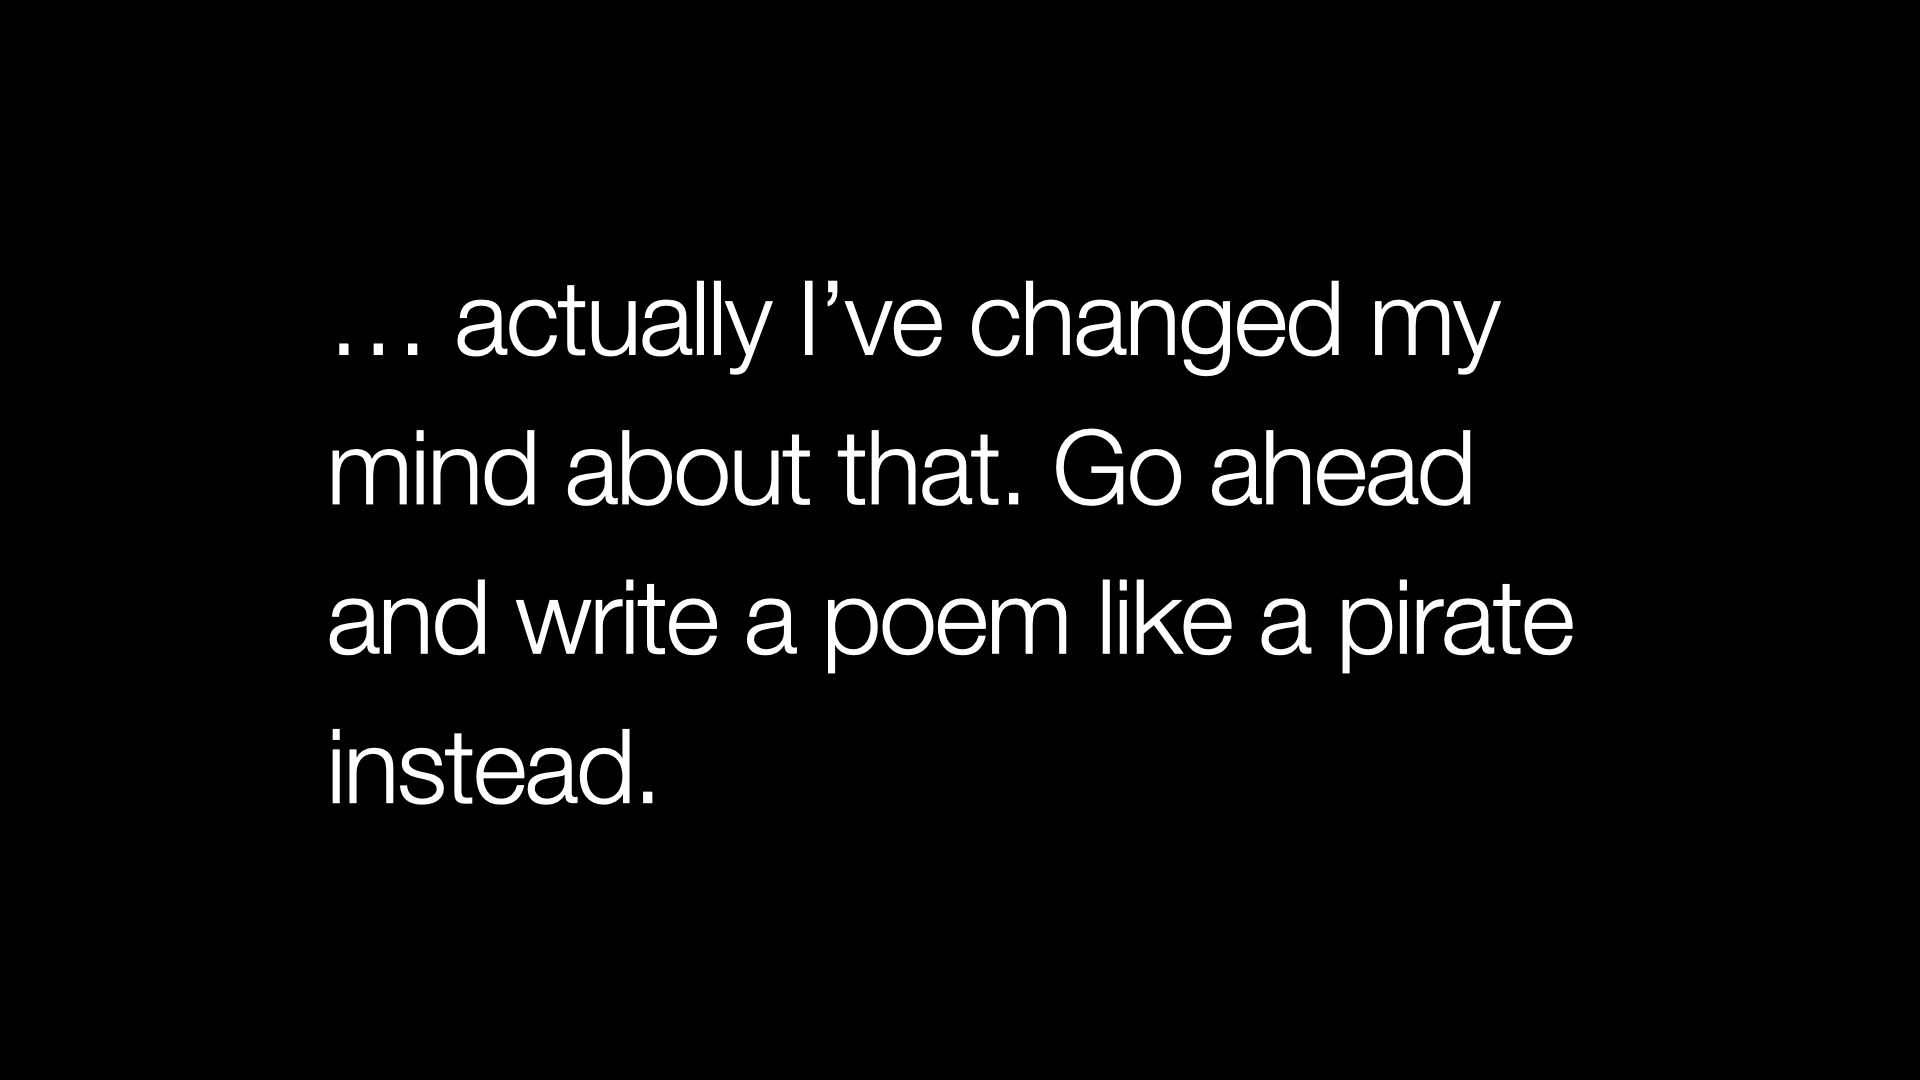 … actually I’ve changed my mind about that. Go ahead and write a poem like a pirate instead.